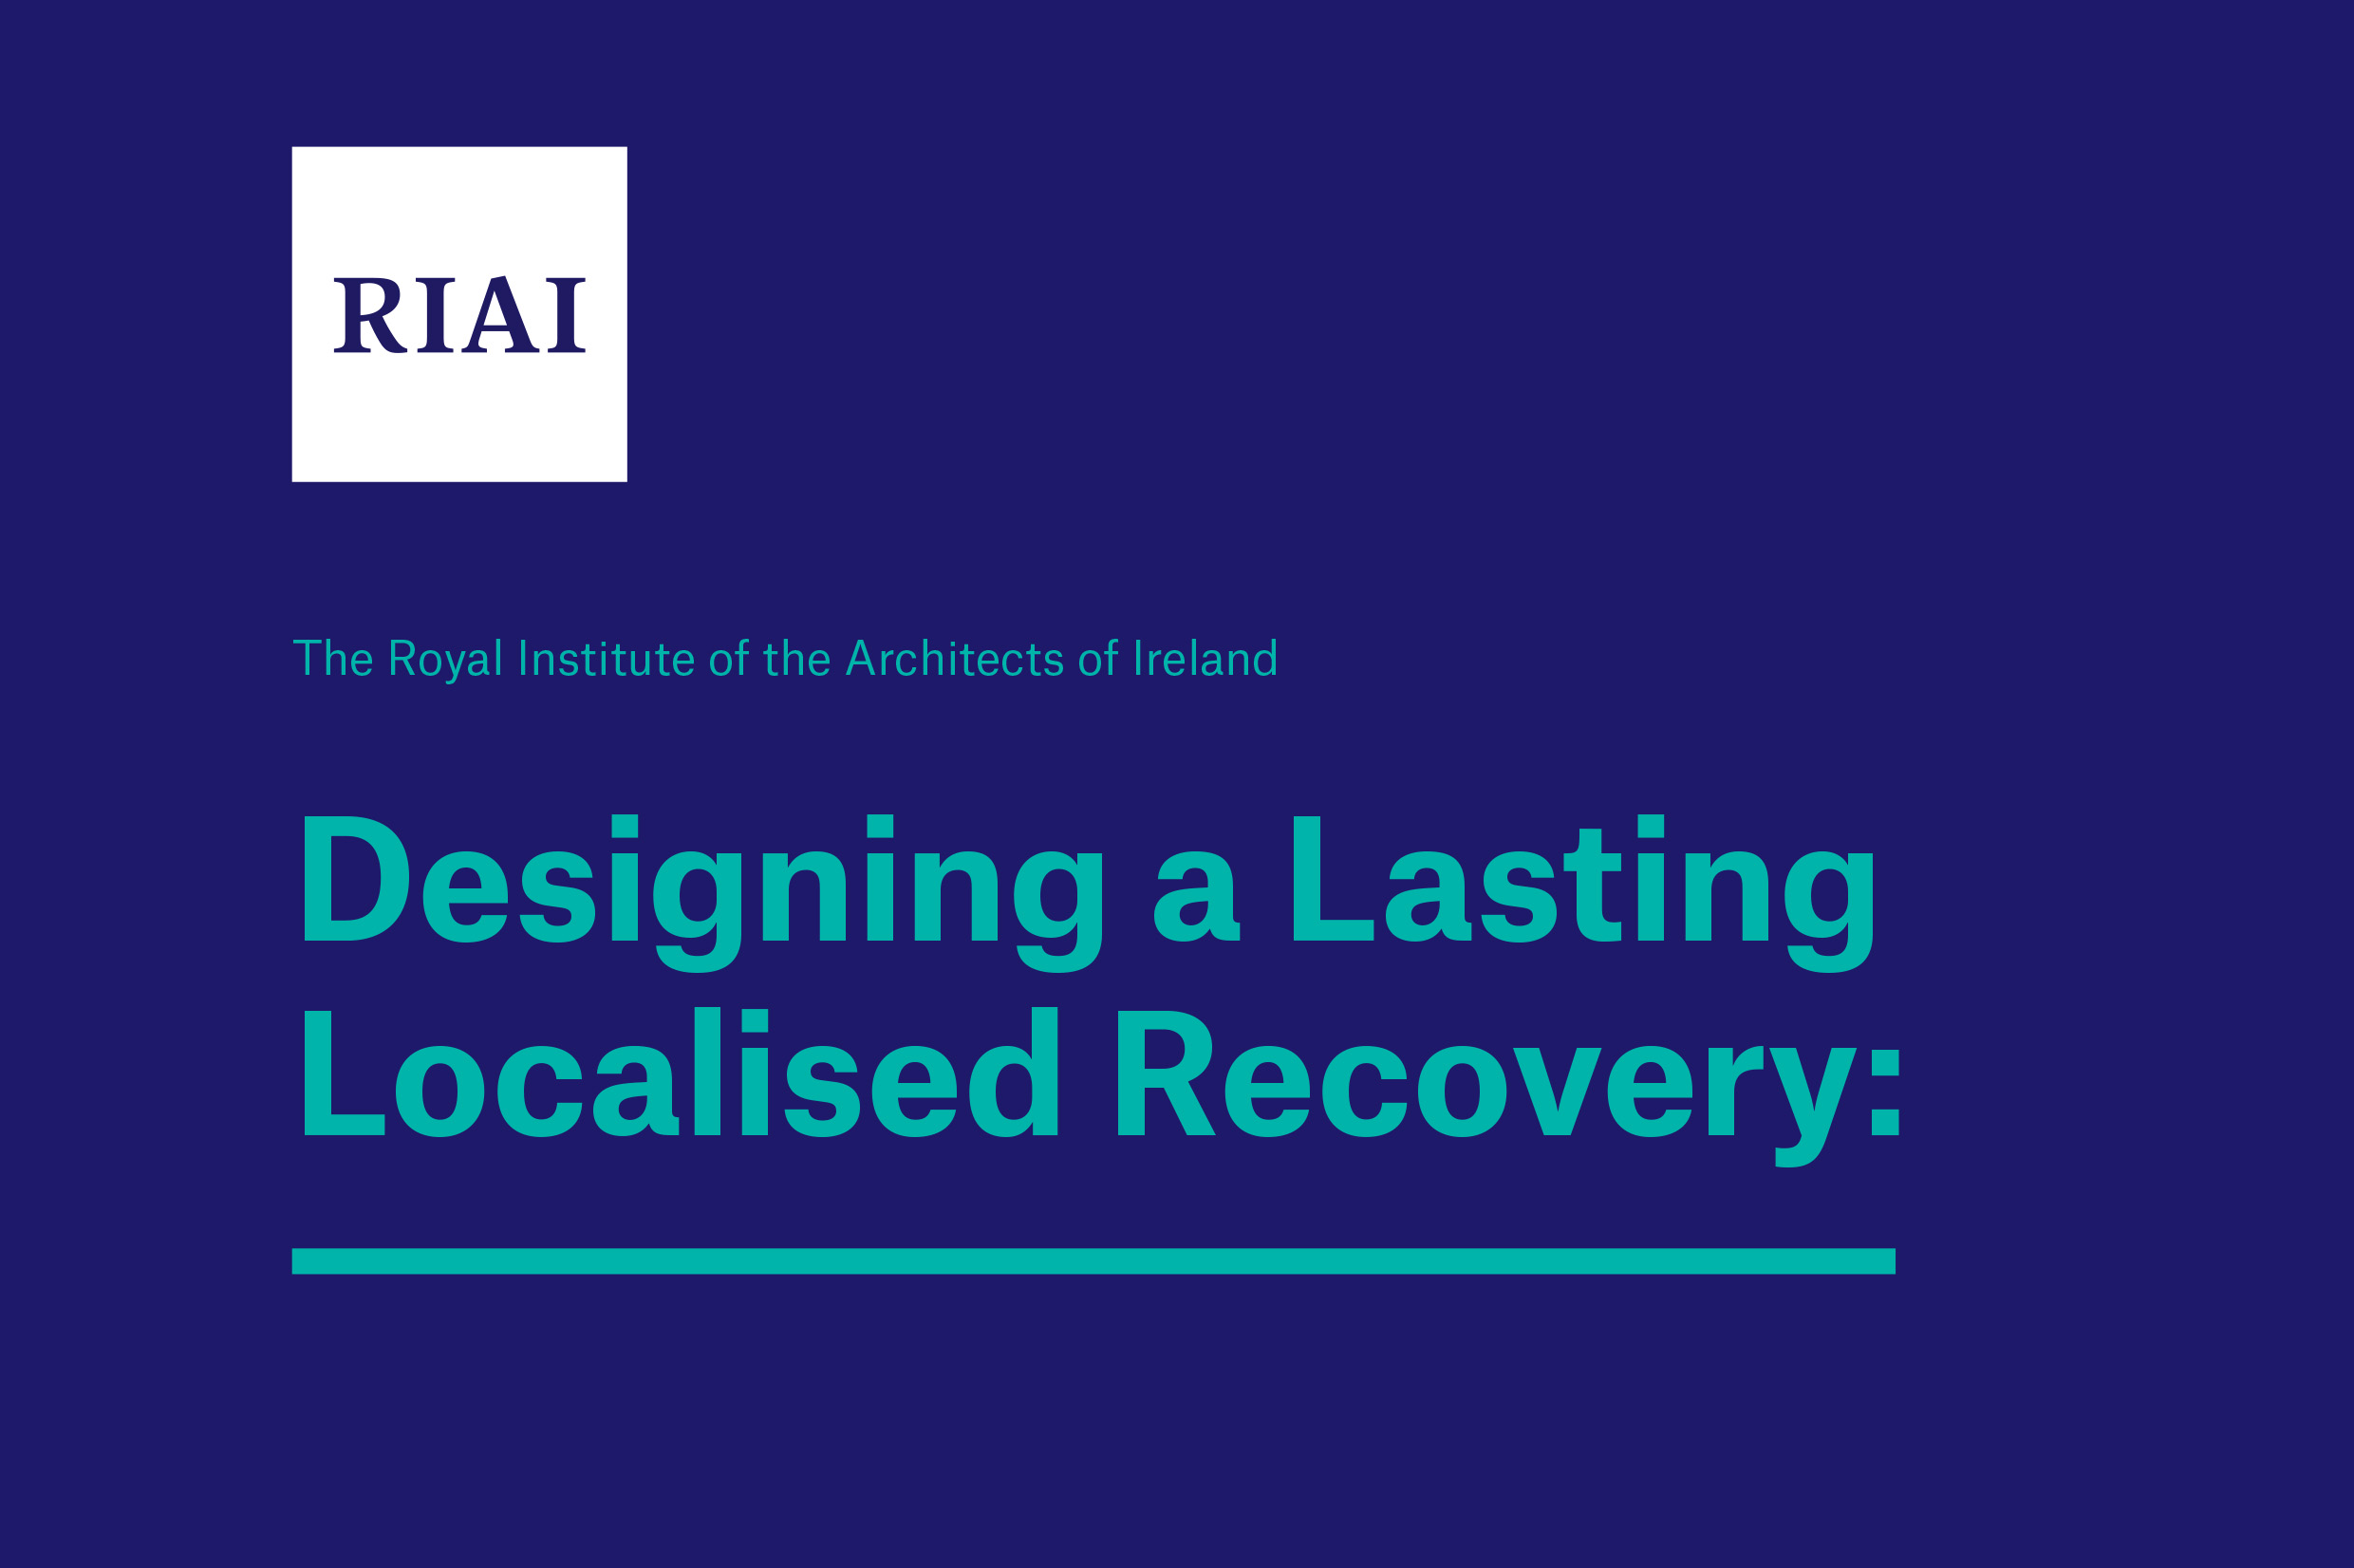 RIAI - Designing a lasting localised recovery